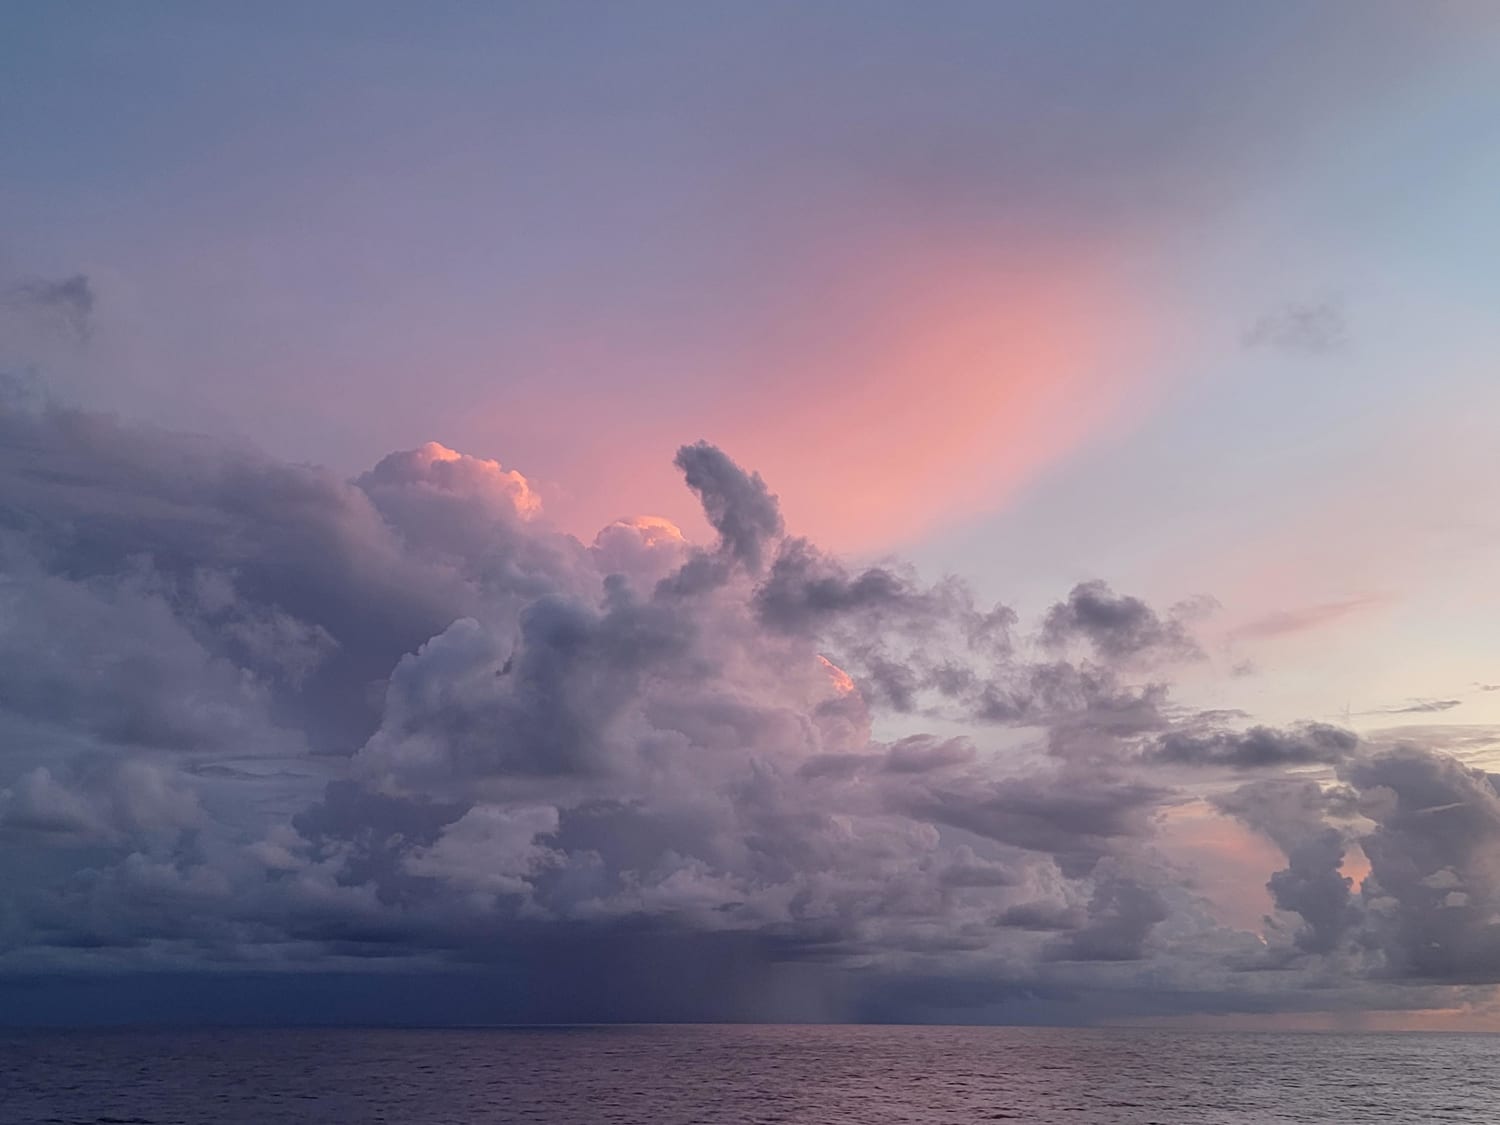 Rainy sunrise in the Gulf of Mexico